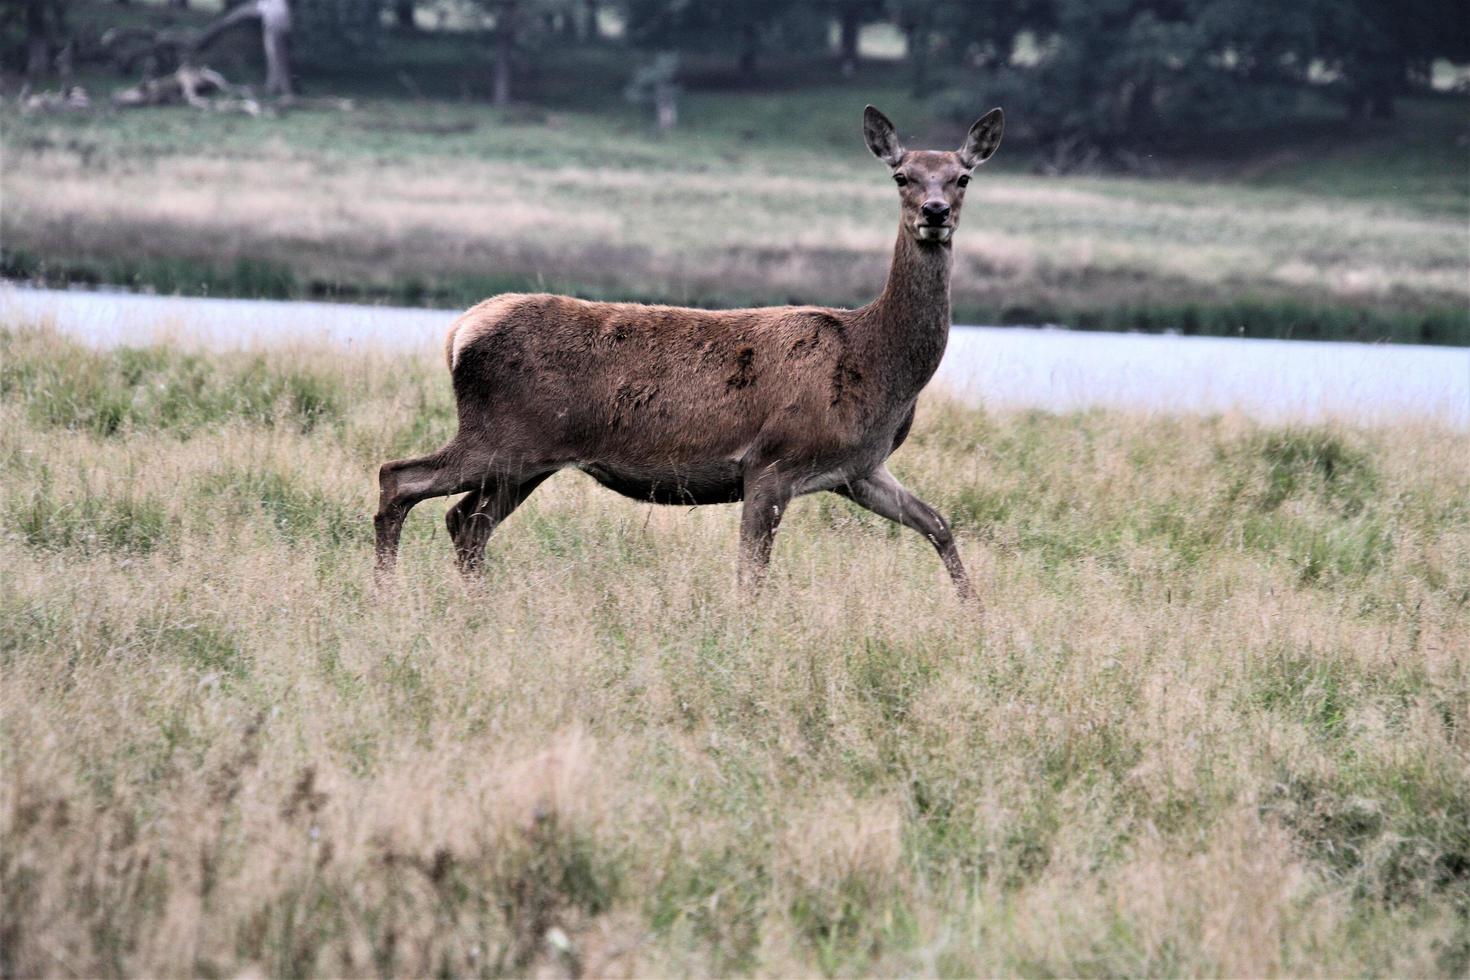 A close up of a Red Deer in the Countryside photo